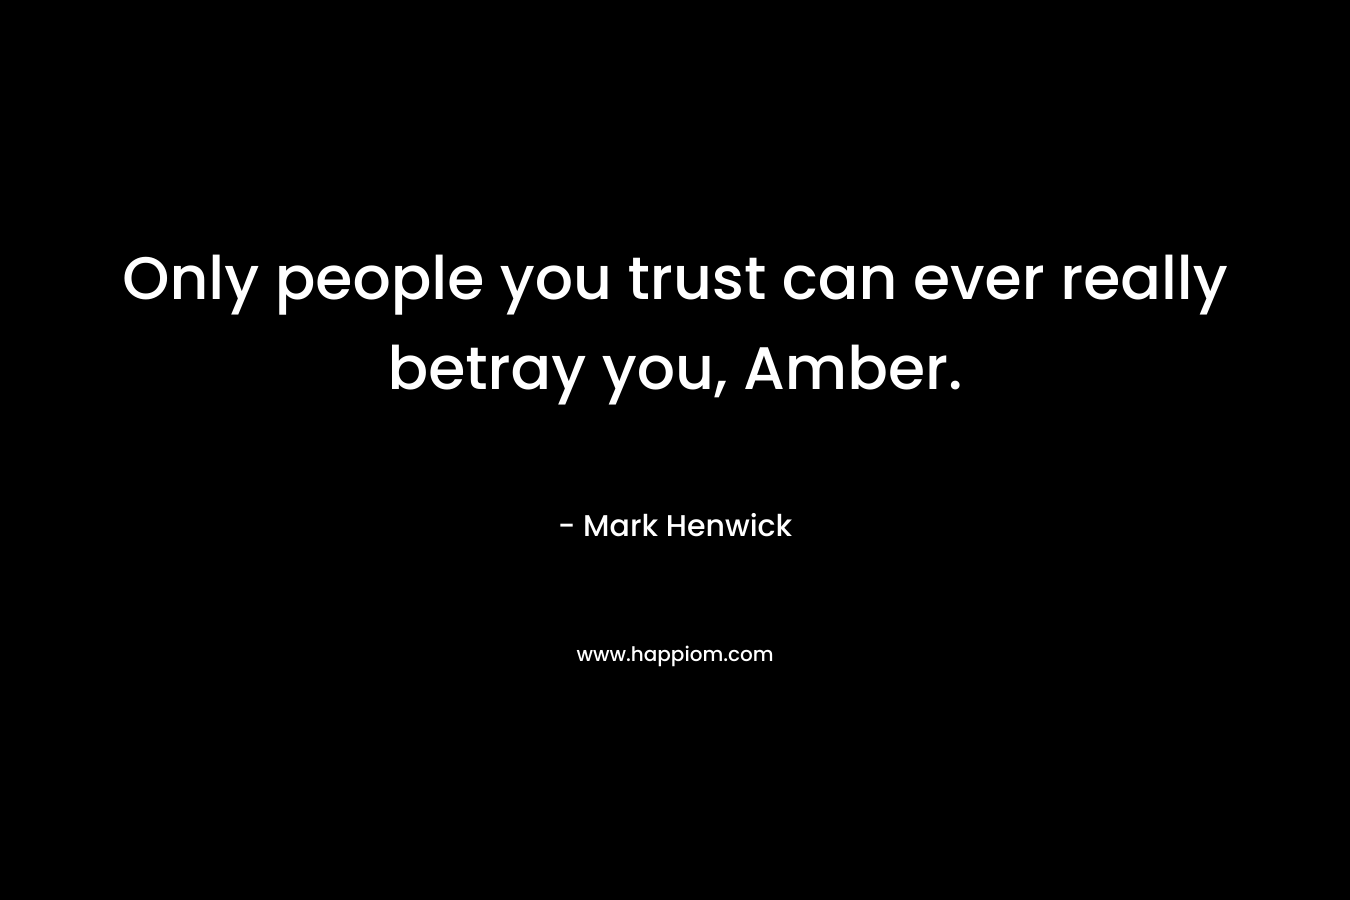 Only people you trust can ever really betray you, Amber. – Mark Henwick